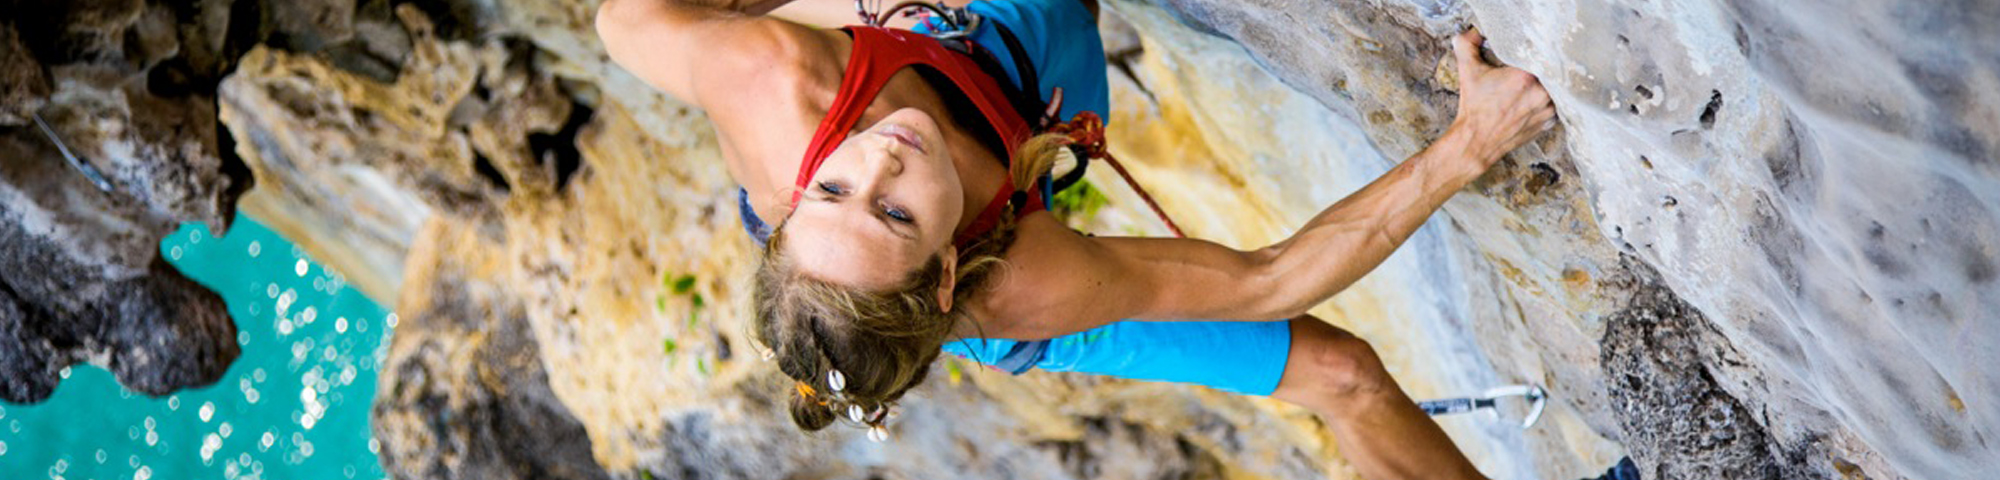 Rannveig Aamod: the climber with the remarkable comeback story ...